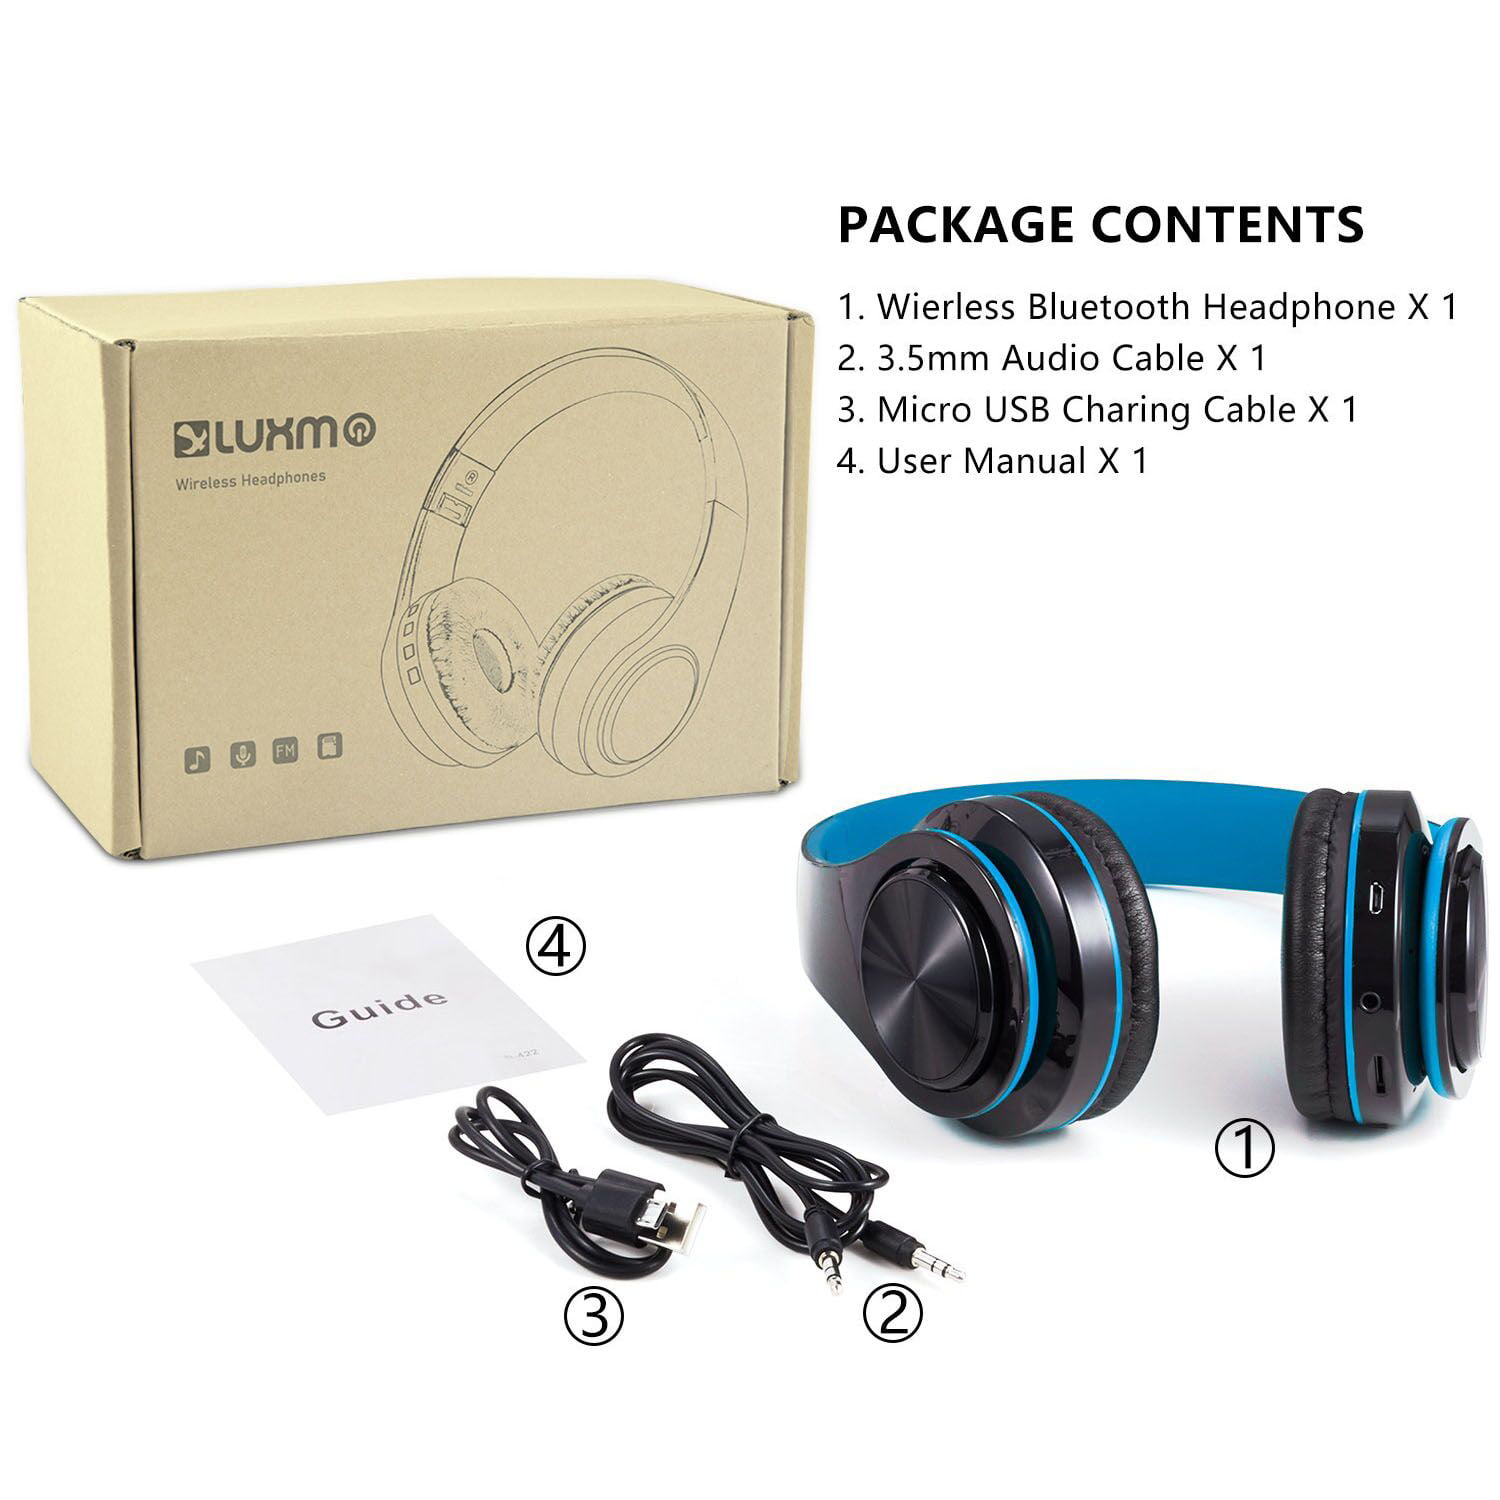 Wireless Hi-Fi Headphones with Mic and Wired Mode